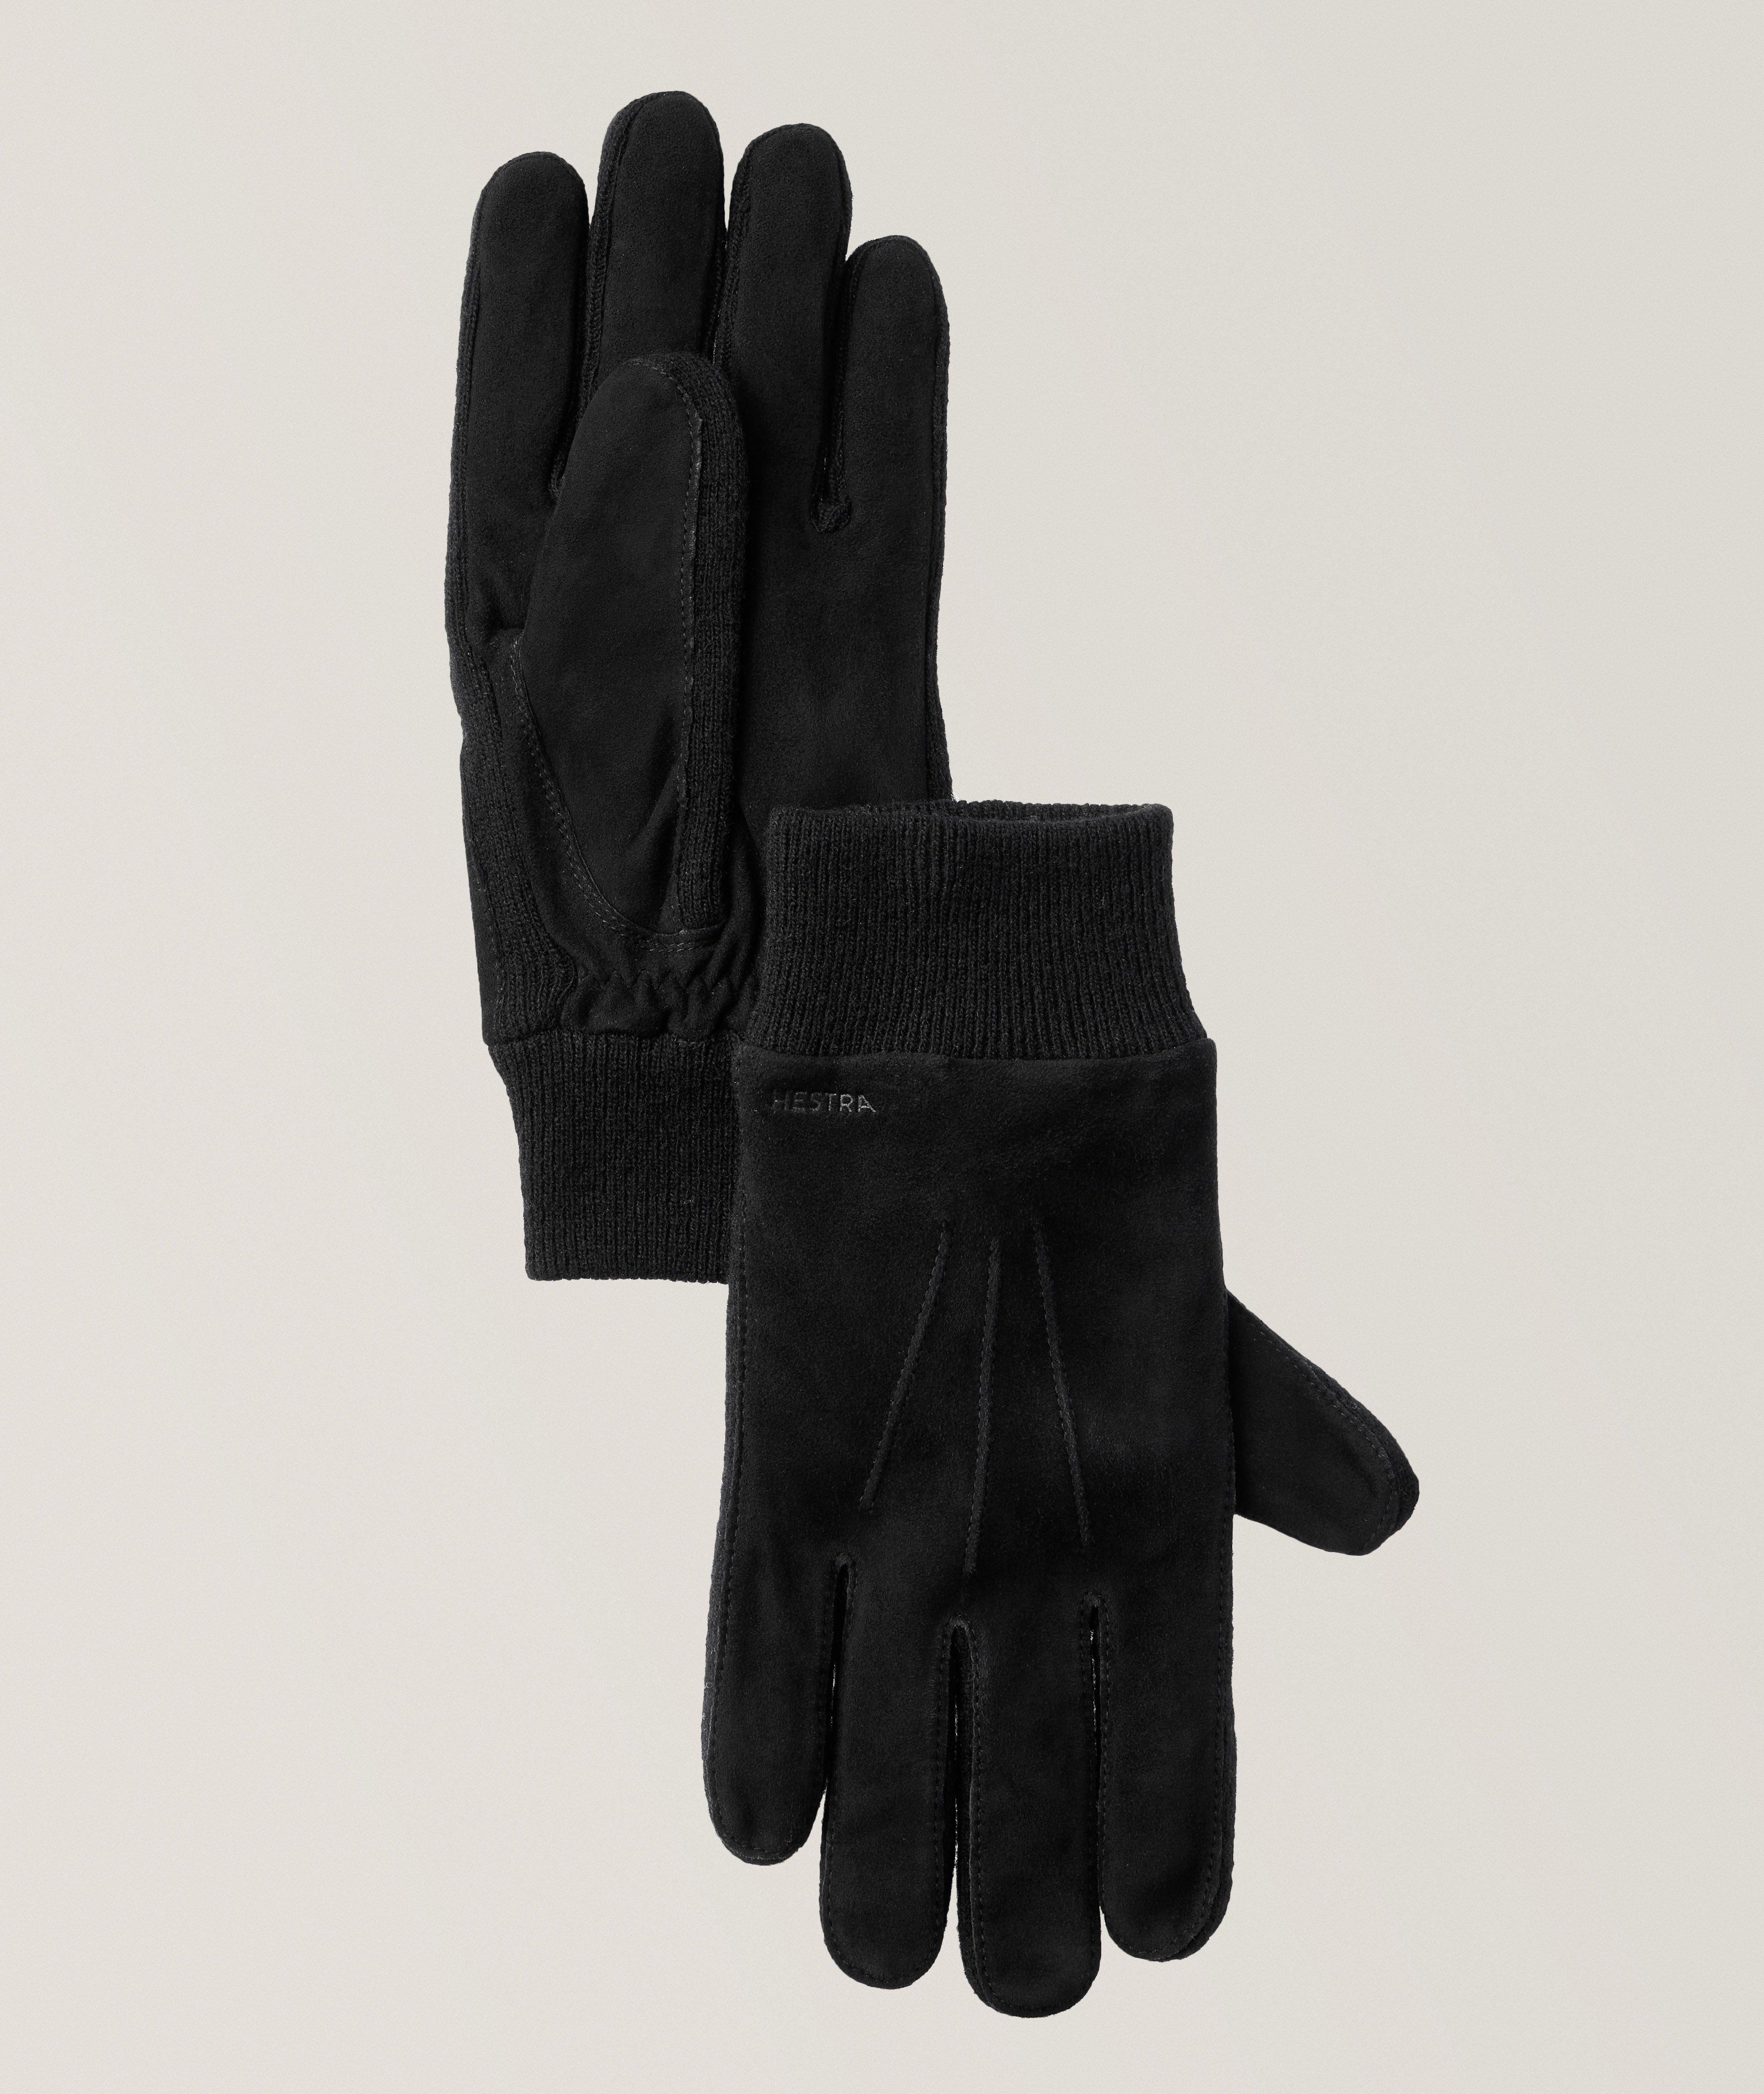 Pronto Uomo Leather Gloves, Hats, Scarves, & Gloves